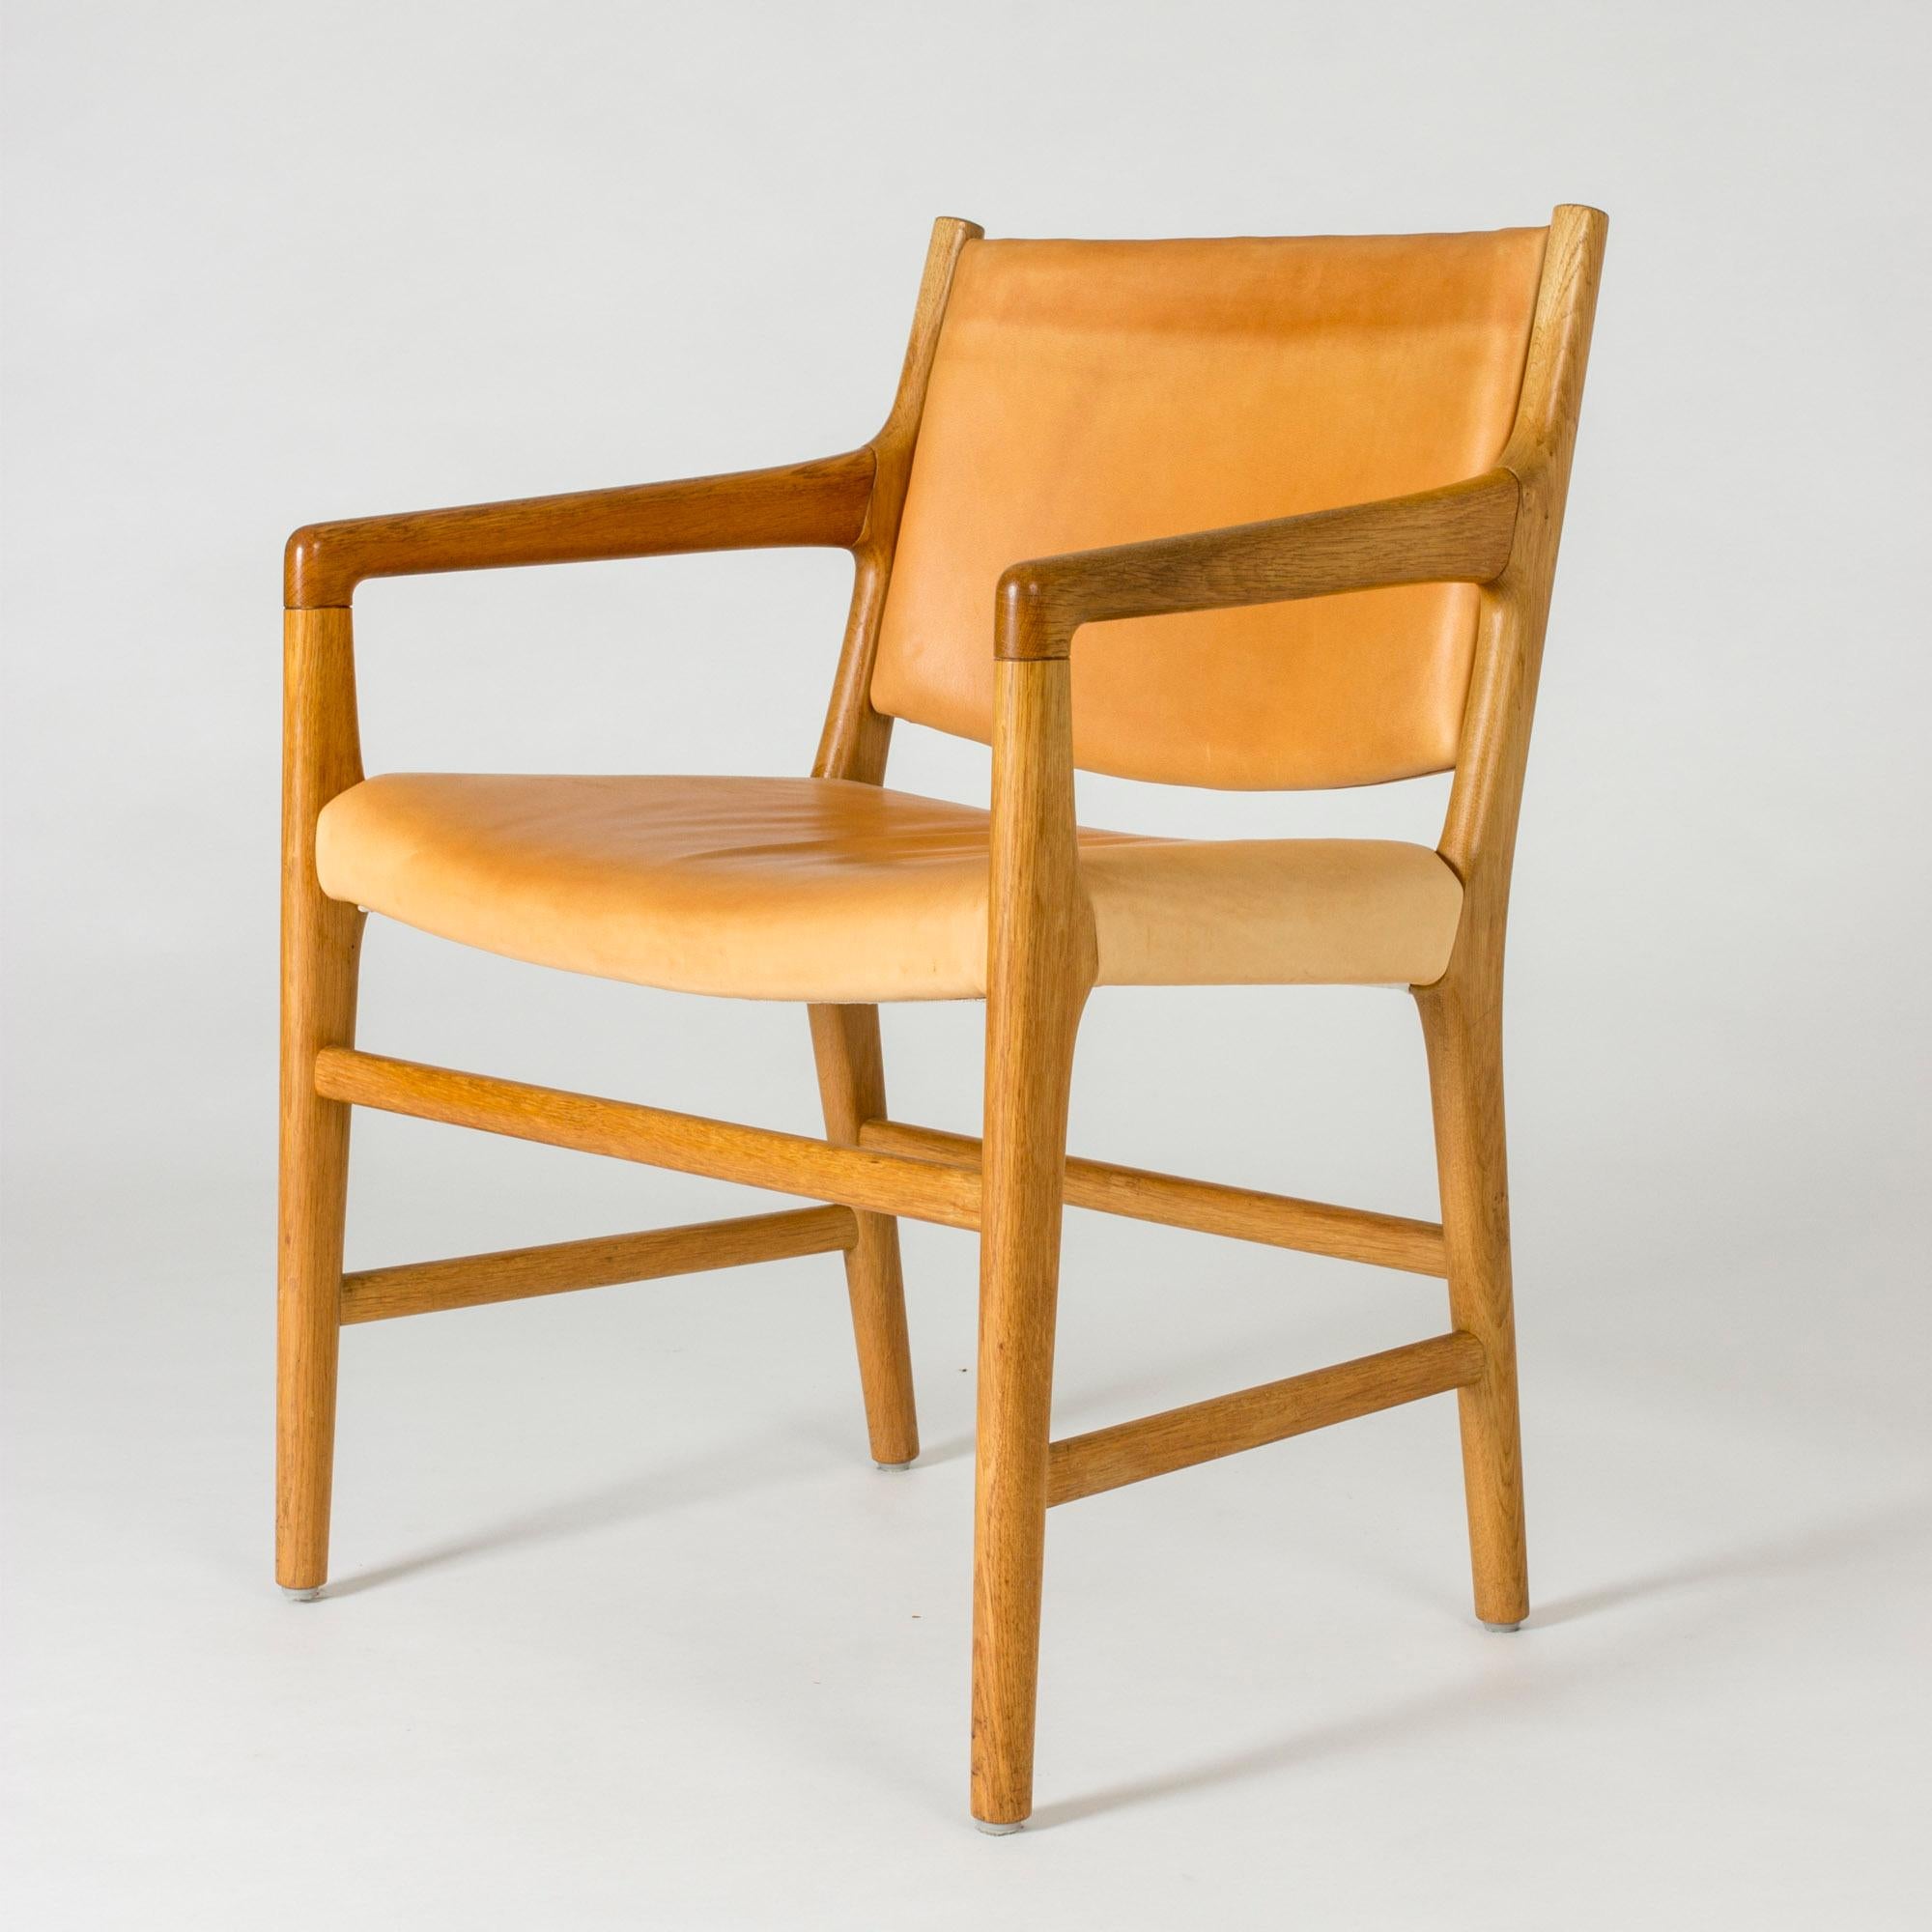 Elegant “JH 507” armchair by Hans J. Wegner, made with an oak frame and natural leather seat and back. Heavily patinated leather.